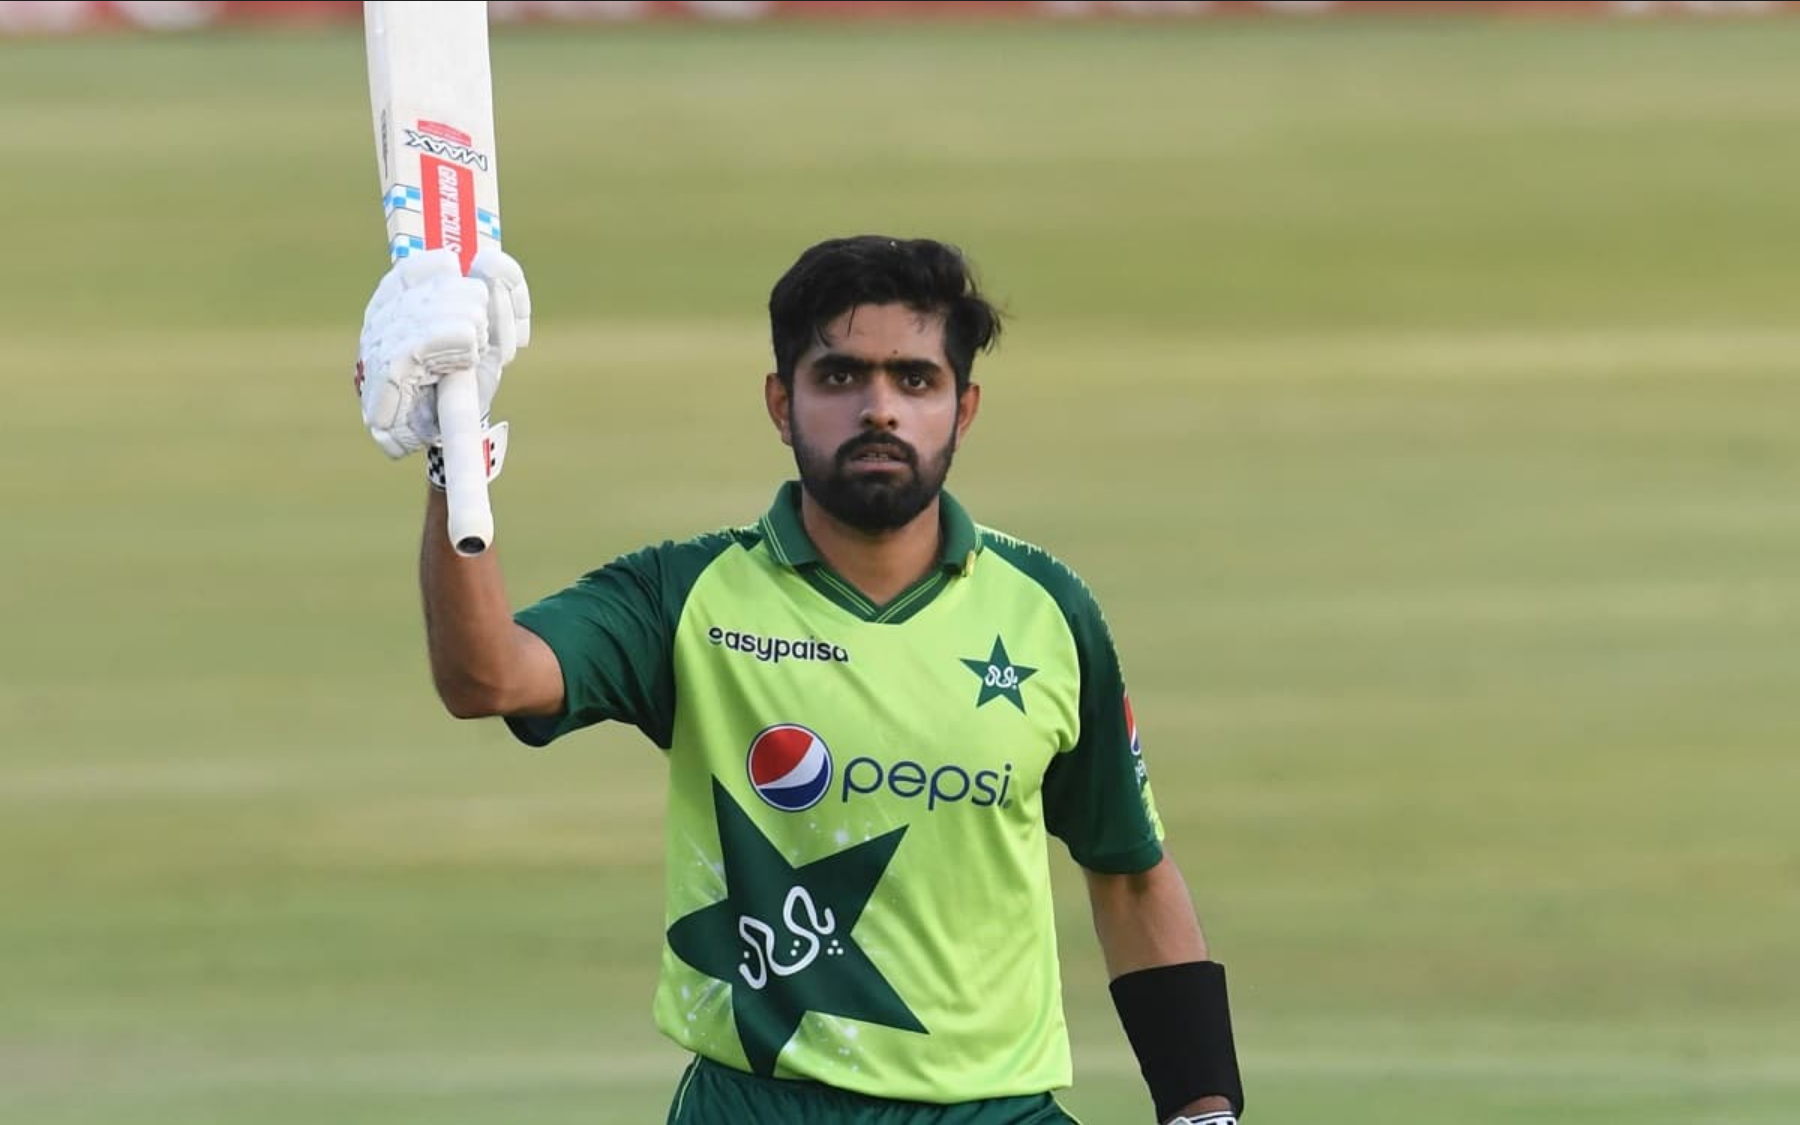 Babar Azam scored a T20I hundred against England. How many T20I 100s had Pakistan men's team scored before this one?